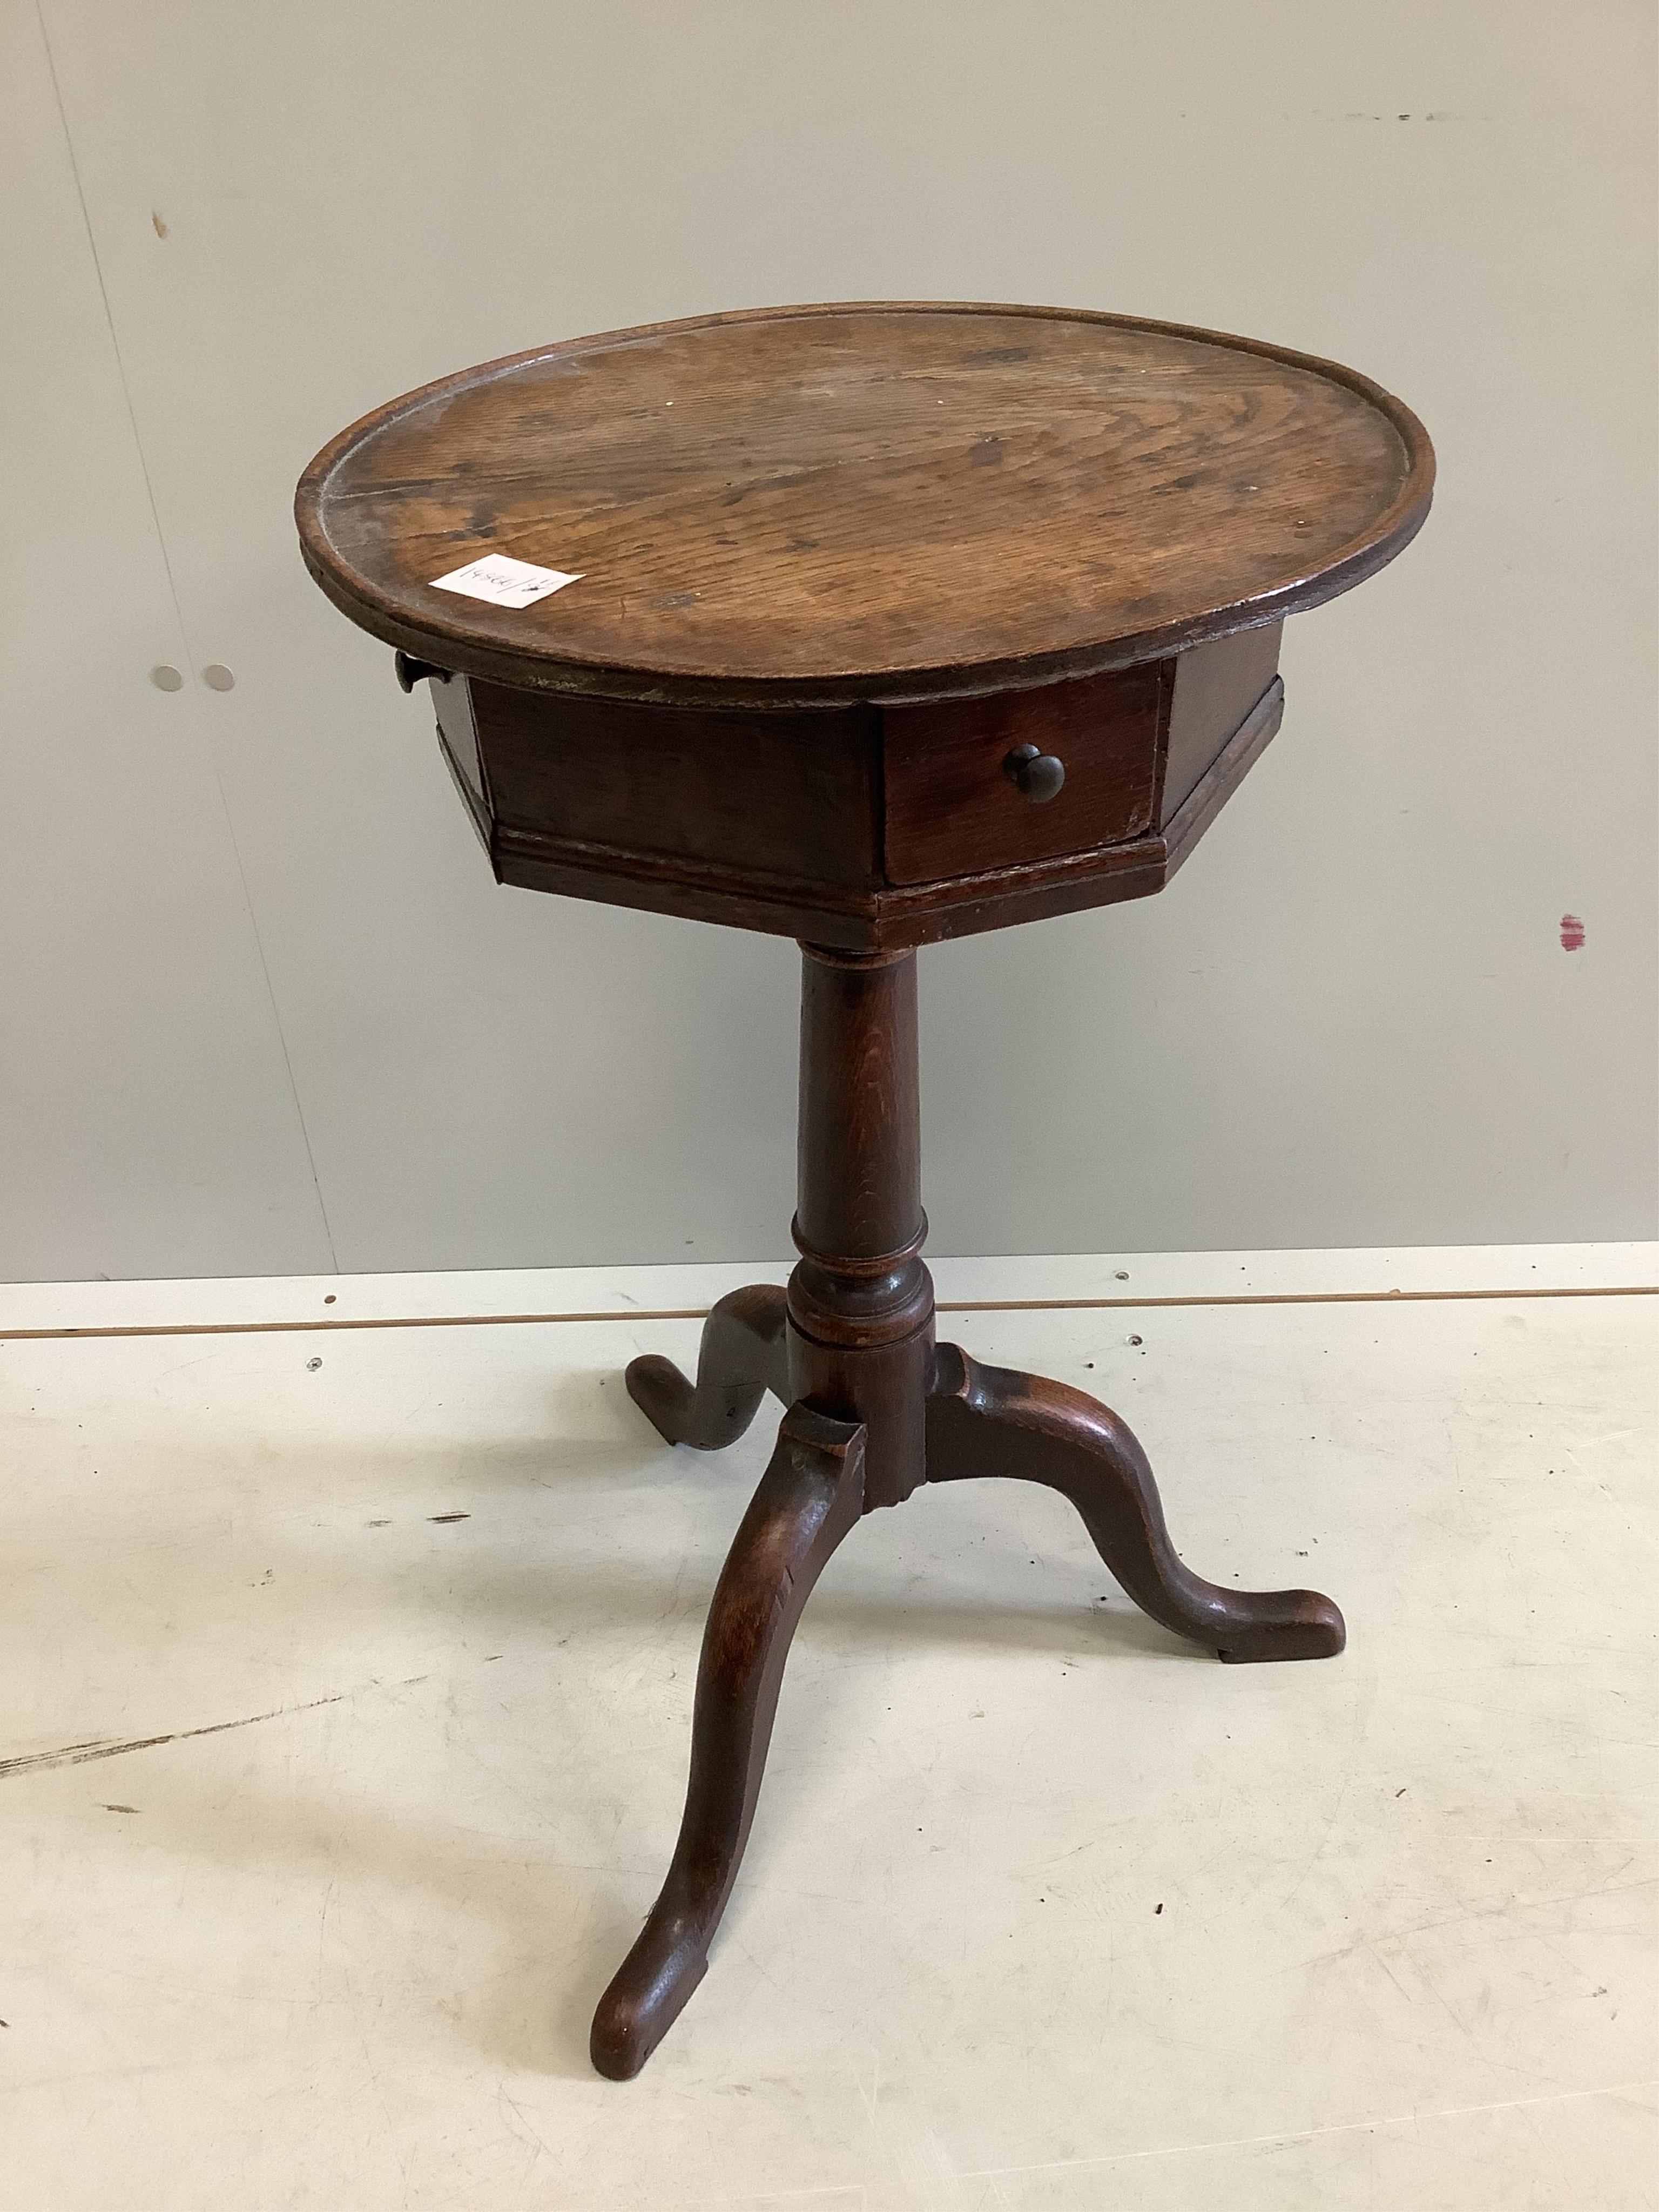 A George III provincial oak circular tripod wine table, fitted drawers, diameter 39cm, height 69cm. Condition - fair